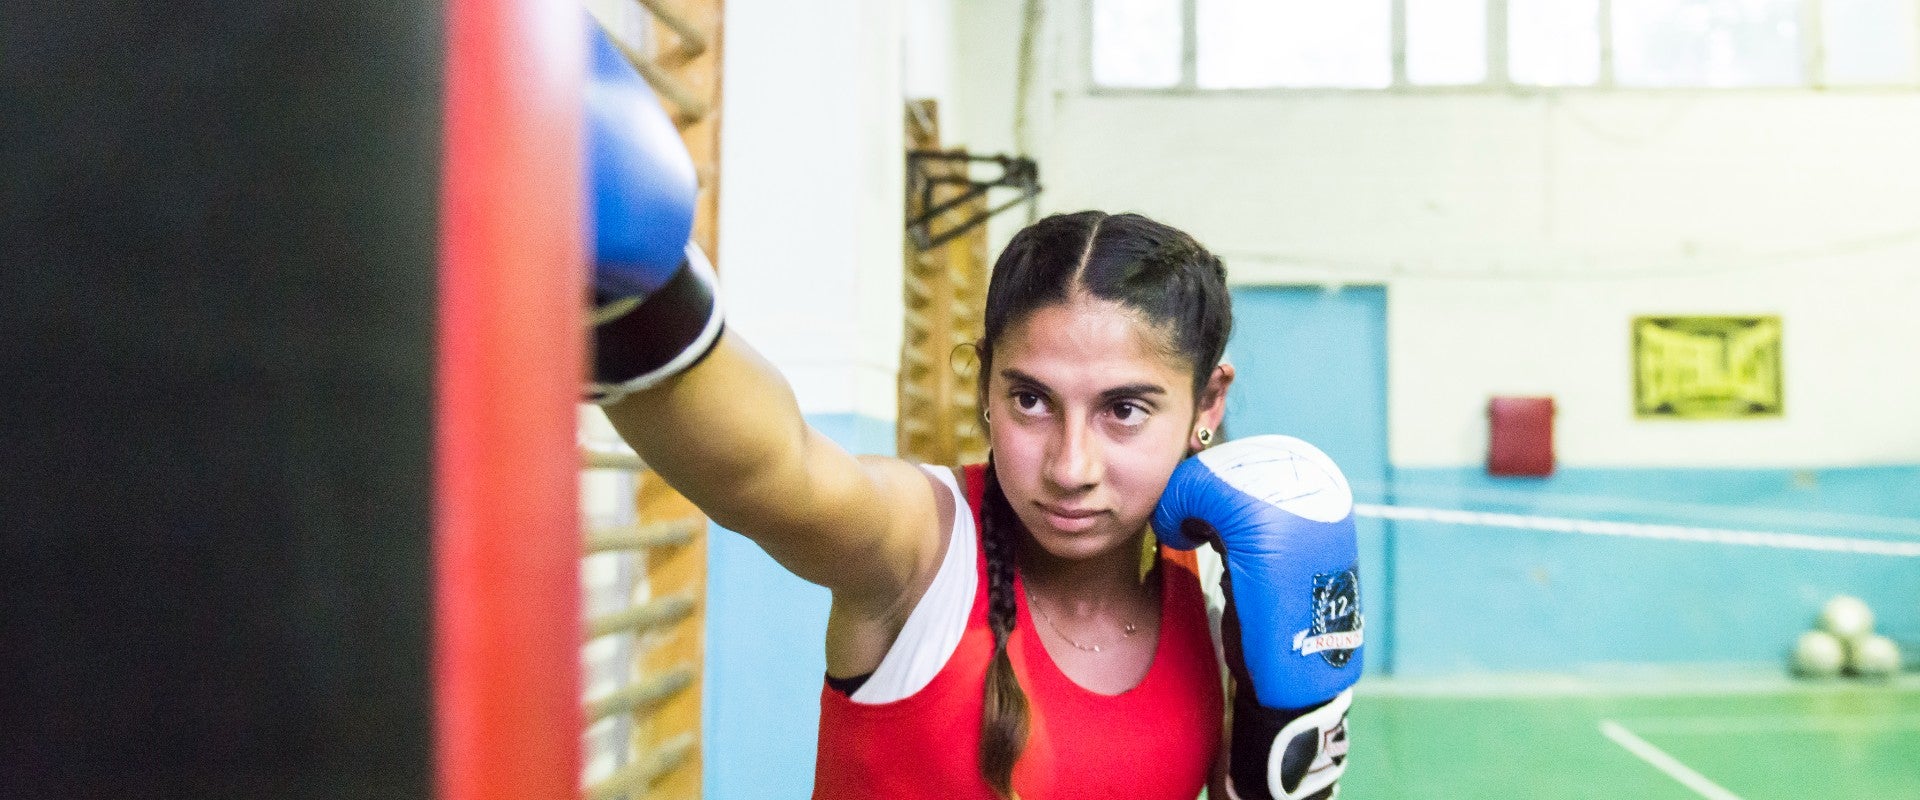 Stela attends the eighth grade and her dream is to become a world boxing champion